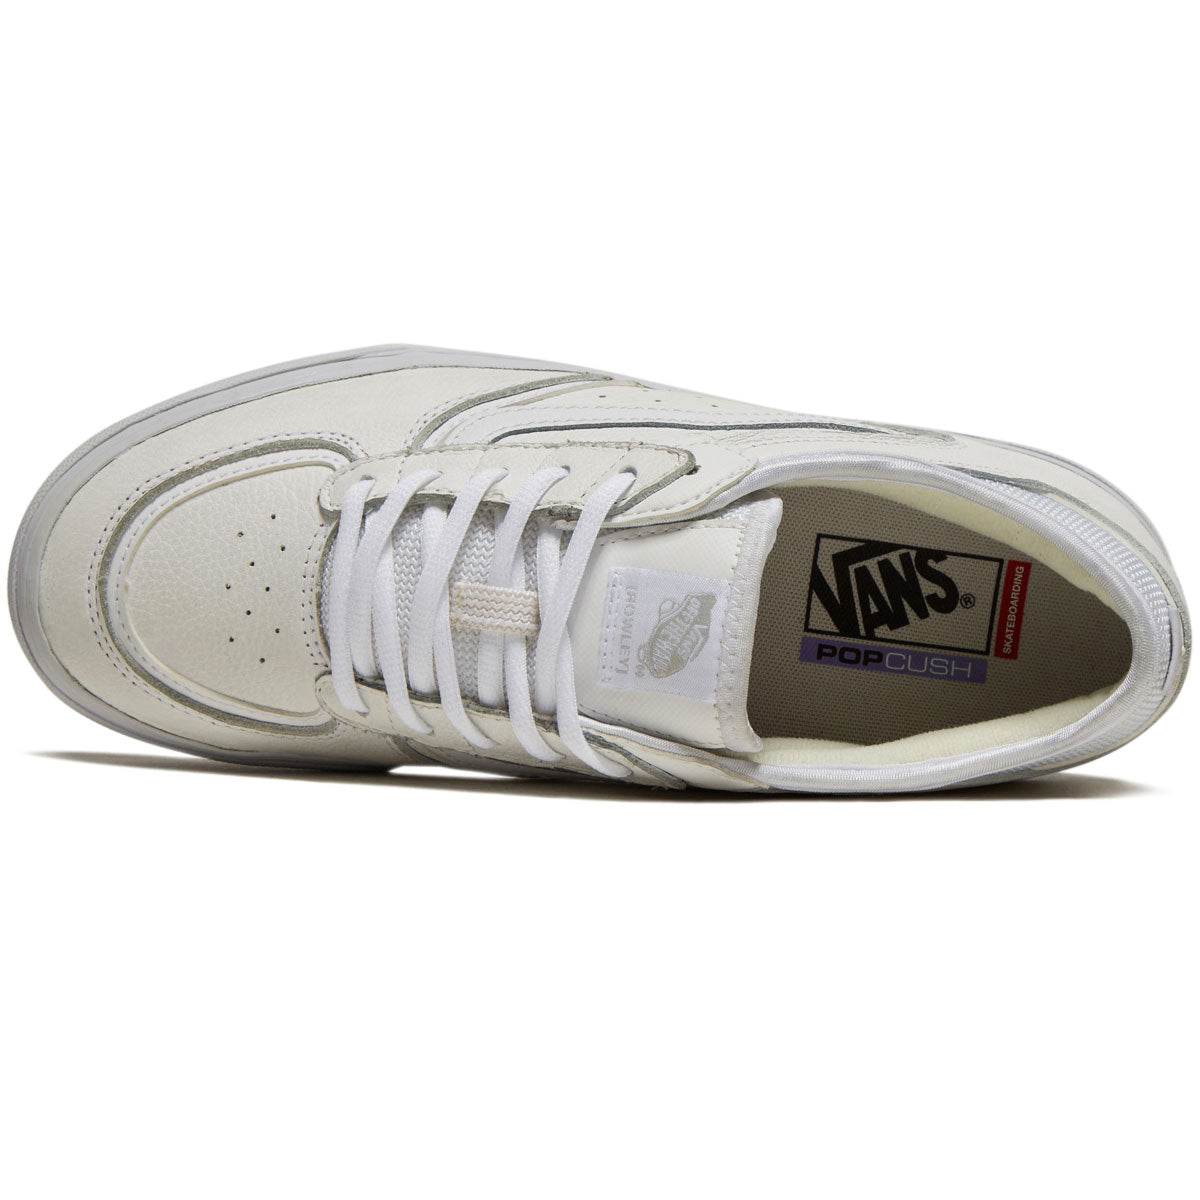 Vans Skate Rowley Shoes - Leather White/White image 3